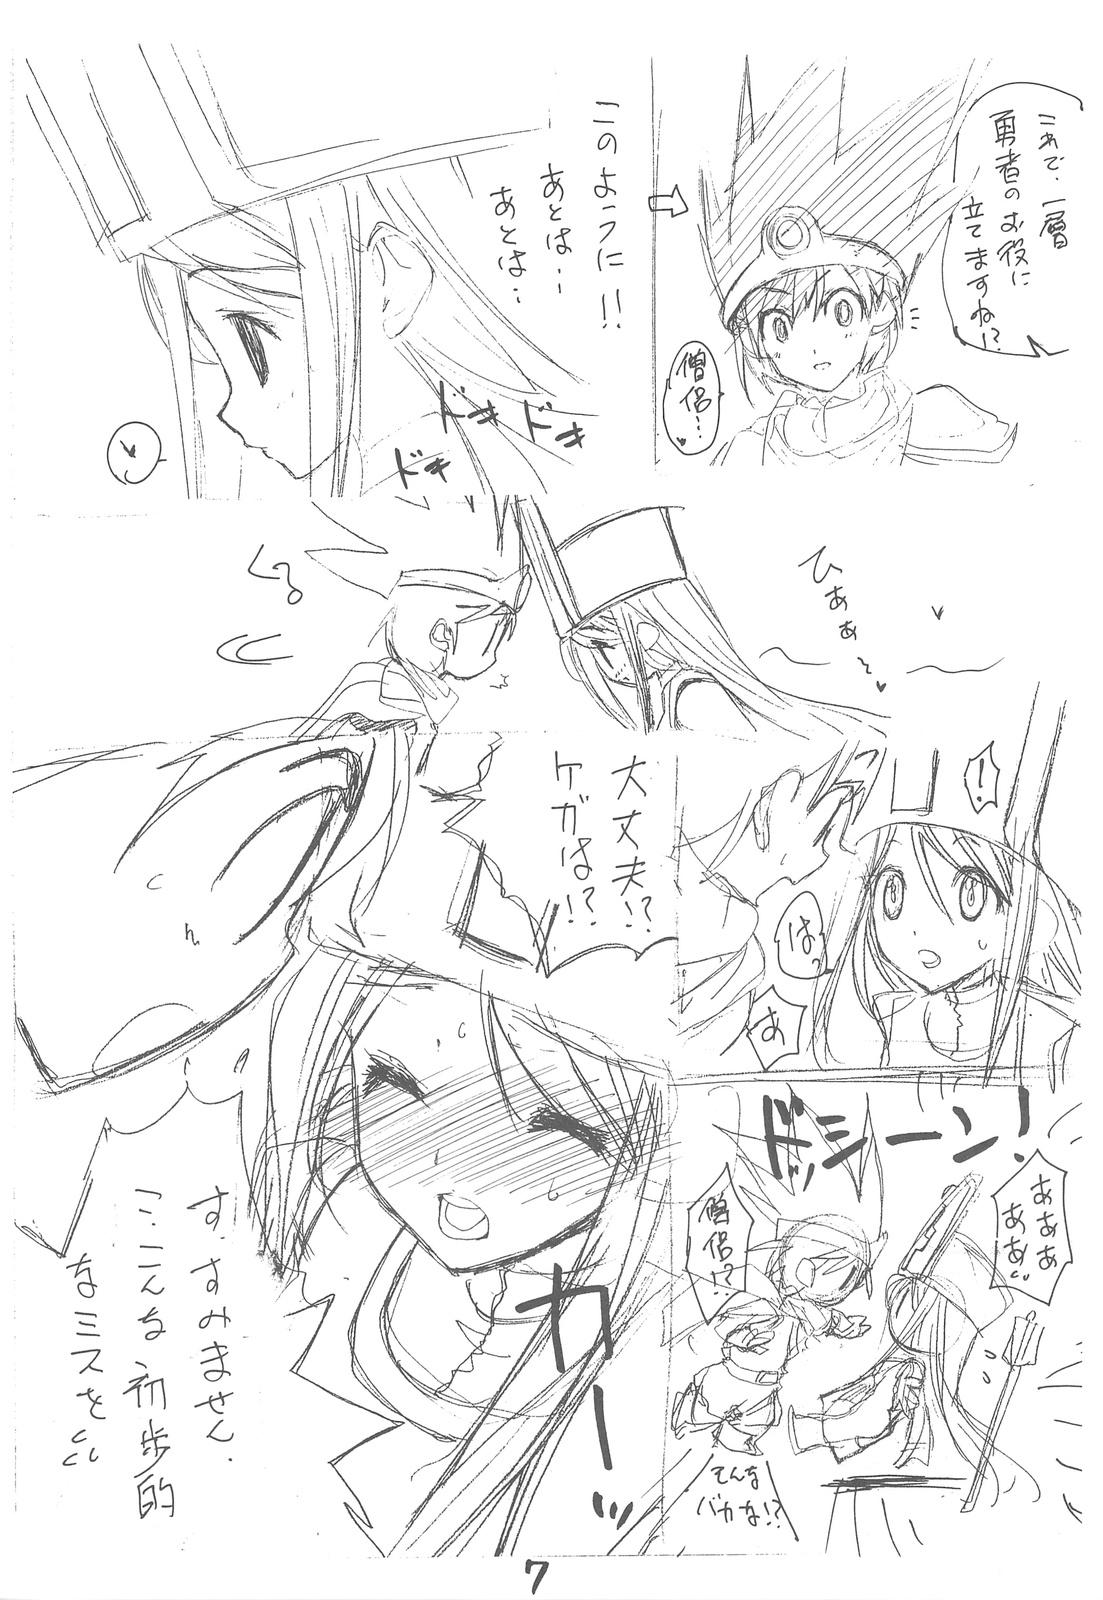 Pmv DRAGON REQUEST Vol.13 - Dragon quest iii Awesome - Page 6